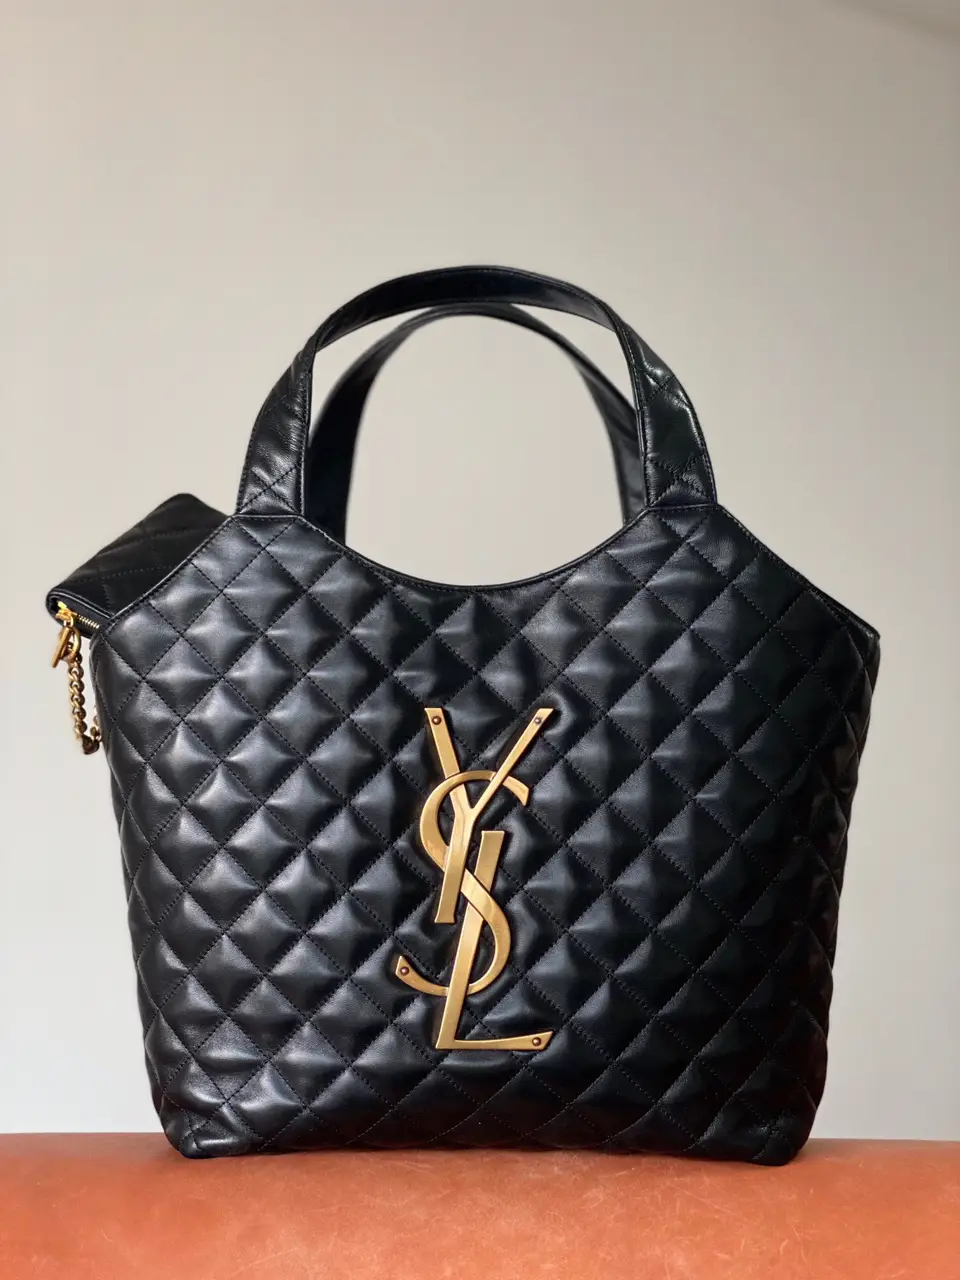 YSL Purse Cake with accessories for this special lady. #ysl